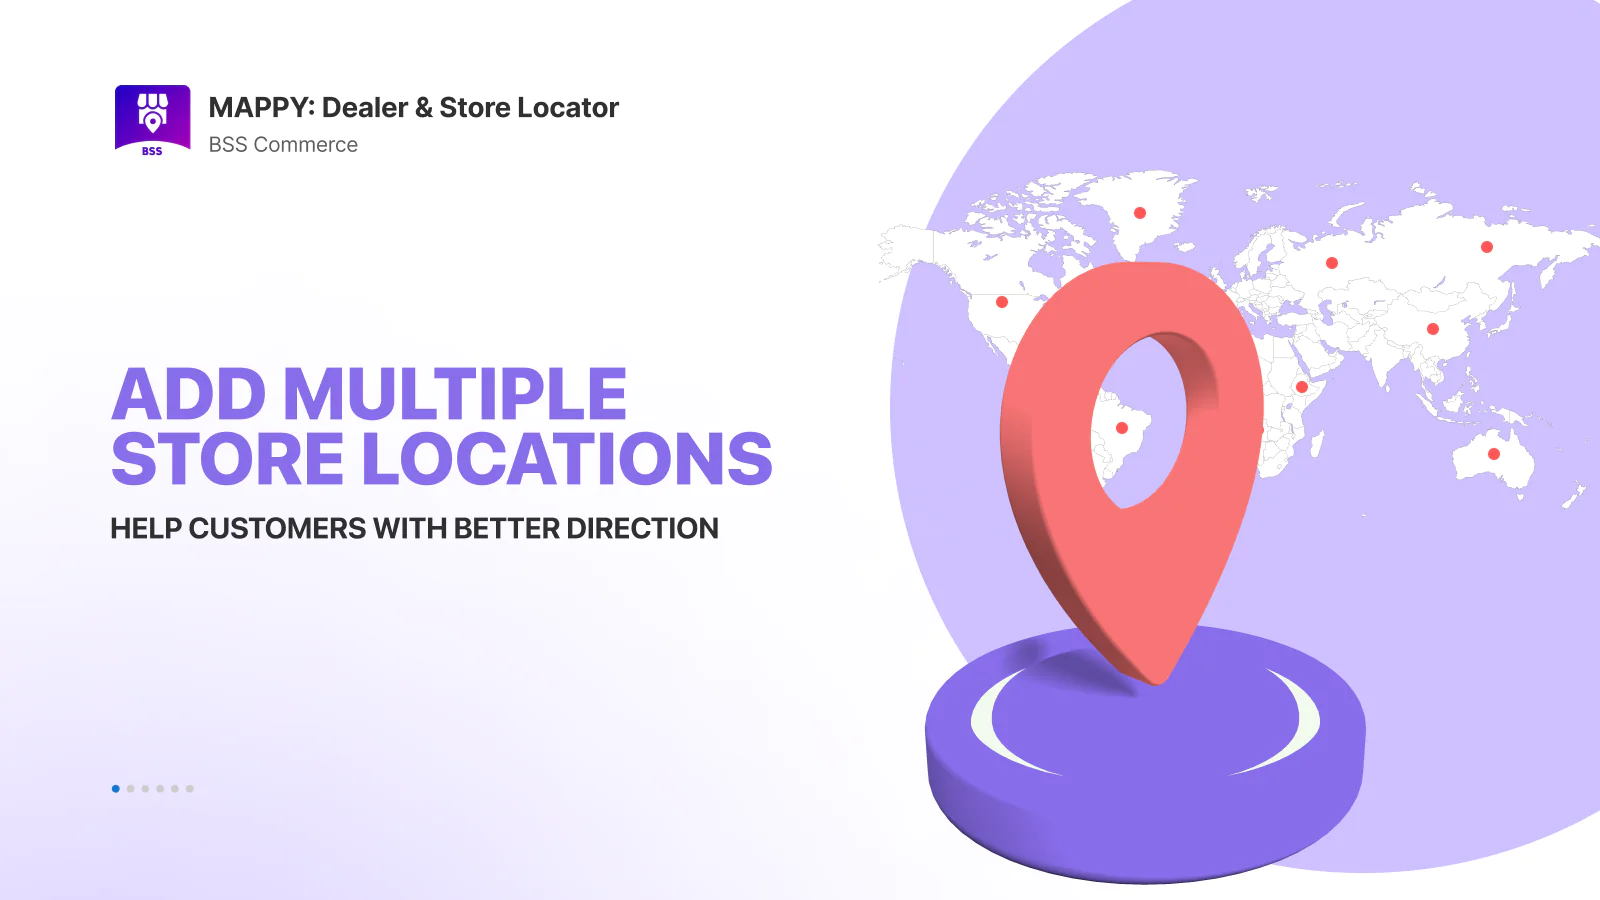 mappy-dealer-and-store-locator-multiple-locations